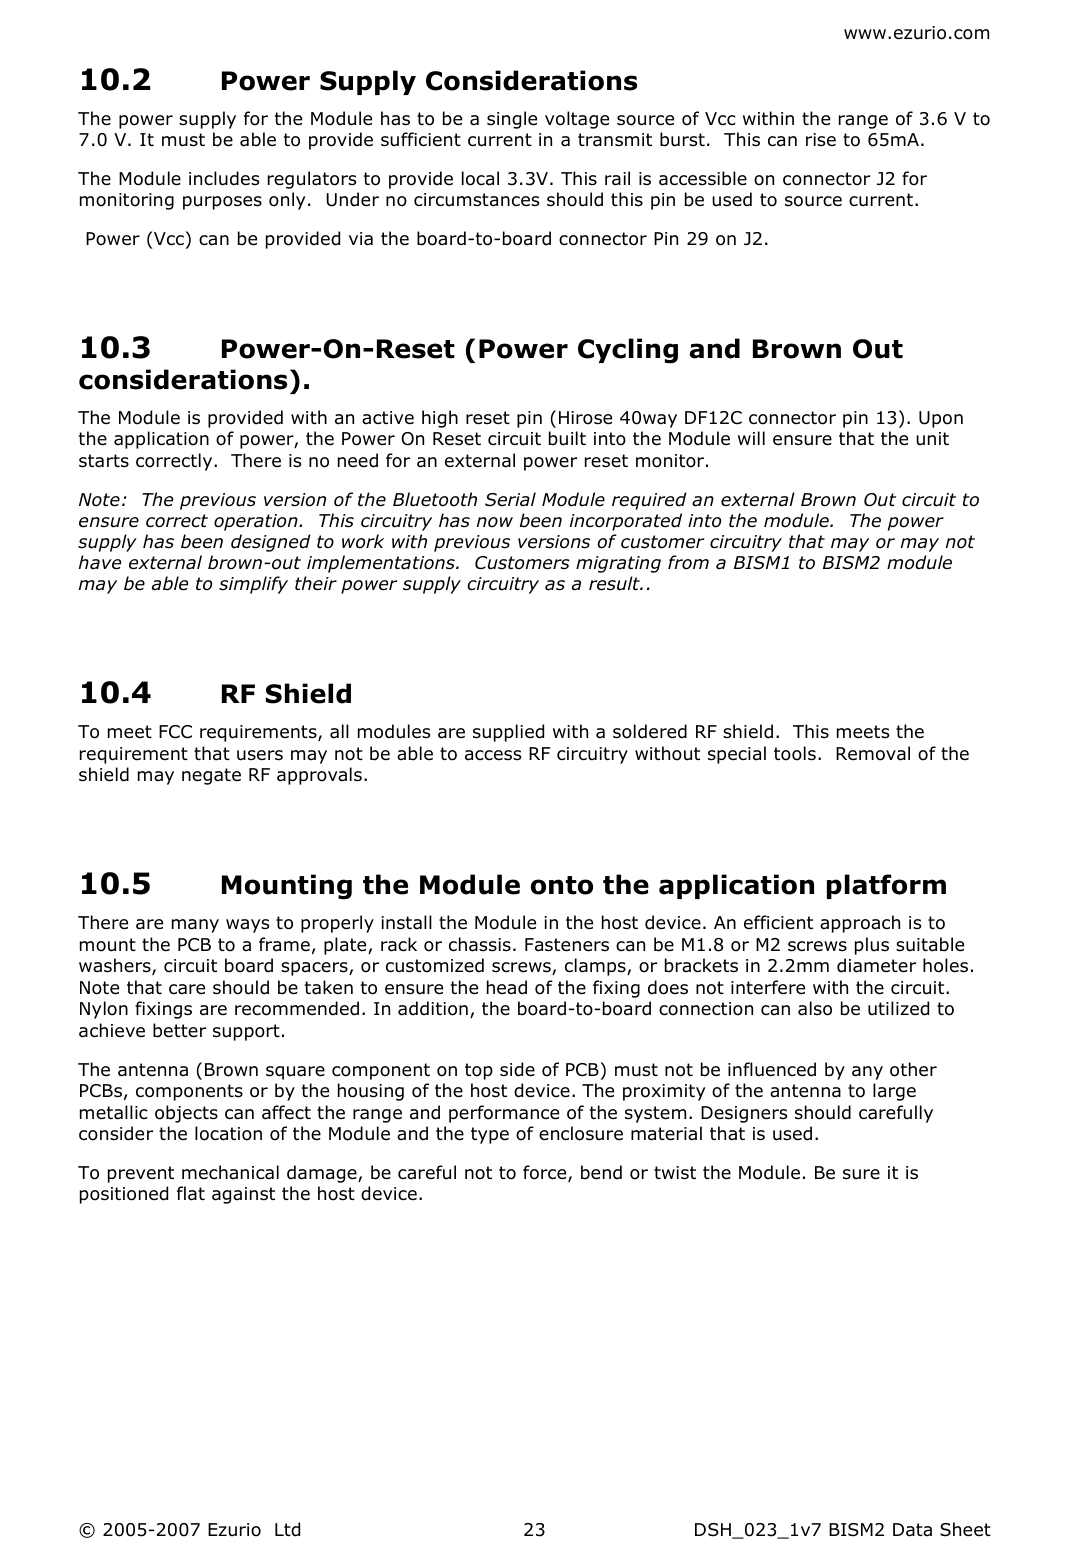 www.ezurio.com © 2005-2007 Ezurio  Ltd  DSH_023_1v7 BISM2 Data Sheet  2310.2 Power Supply Considerations The power supply for the Module has to be a single voltage source of Vcc within the range of 3.6 V to 7.0 V. It must be able to provide sufficient current in a transmit burst.  This can rise to 65mA.   The Module includes regulators to provide local 3.3V. This rail is accessible on connector J2 for monitoring purposes only.  Under no circumstances should this pin be used to source current.  Power (Vcc) can be provided via the board-to-board connector Pin 29 on J2.   10.3 Power-On-Reset (Power Cycling and Brown Out considerations). The Module is provided with an active high reset pin (Hirose 40way DF12C connector pin 13). Upon the application of power, the Power On Reset circuit built into the Module will ensure that the unit starts correctly.  There is no need for an external power reset monitor. Note:  The previous version of the Bluetooth Serial Module required an external Brown Out circuit to ensure correct operation.  This circuitry has now been incorporated into the module.  The power supply has been designed to work with previous versions of customer circuitry that may or may not have external brown-out implementations.  Customers migrating from a BISM1 to BISM2 module may be able to simplify their power supply circuitry as a result..  10.4 RF Shield To meet FCC requirements, all modules are supplied with a soldered RF shield.  This meets the requirement that users may not be able to access RF circuitry without special tools.  Removal of the shield may negate RF approvals.  10.5 Mounting the Module onto the application platform There are many ways to properly install the Module in the host device. An efficient approach is to mount the PCB to a frame, plate, rack or chassis. Fasteners can be M1.8 or M2 screws plus suitable washers, circuit board spacers, or customized screws, clamps, or brackets in 2.2mm diameter holes. Note that care should be taken to ensure the head of the fixing does not interfere with the circuit. Nylon fixings are recommended. In addition, the board-to-board connection can also be utilized to achieve better support.  The antenna (Brown square component on top side of PCB) must not be influenced by any other PCBs, components or by the housing of the host device. The proximity of the antenna to large metallic objects can affect the range and performance of the system. Designers should carefully consider the location of the Module and the type of enclosure material that is used. To prevent mechanical damage, be careful not to force, bend or twist the Module. Be sure it is positioned flat against the host device.  